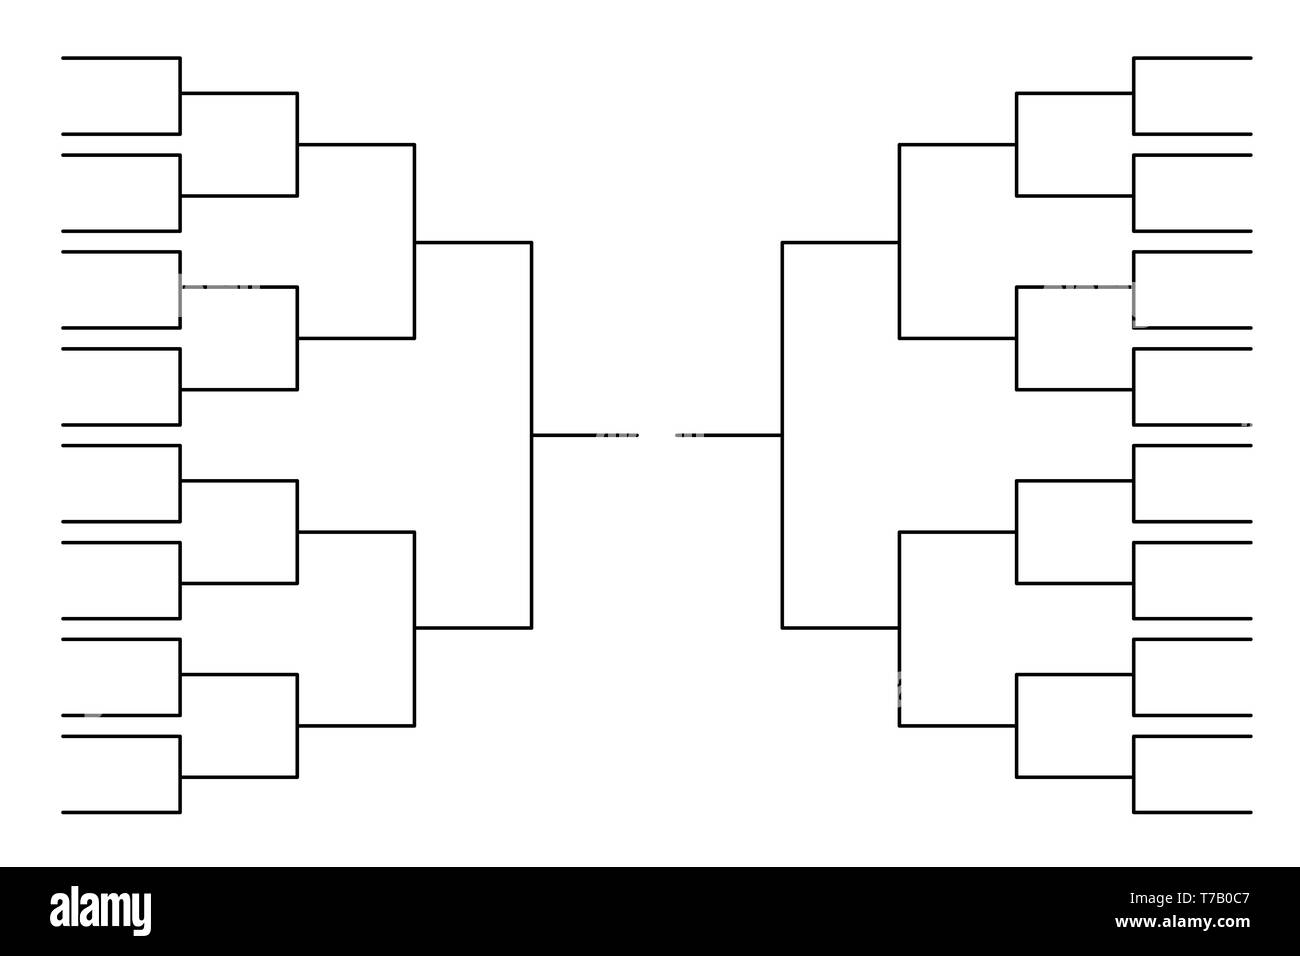 simple-black-tournament-bracket-template-for-32-teams-isolated-on-white-stock-vector-image-art